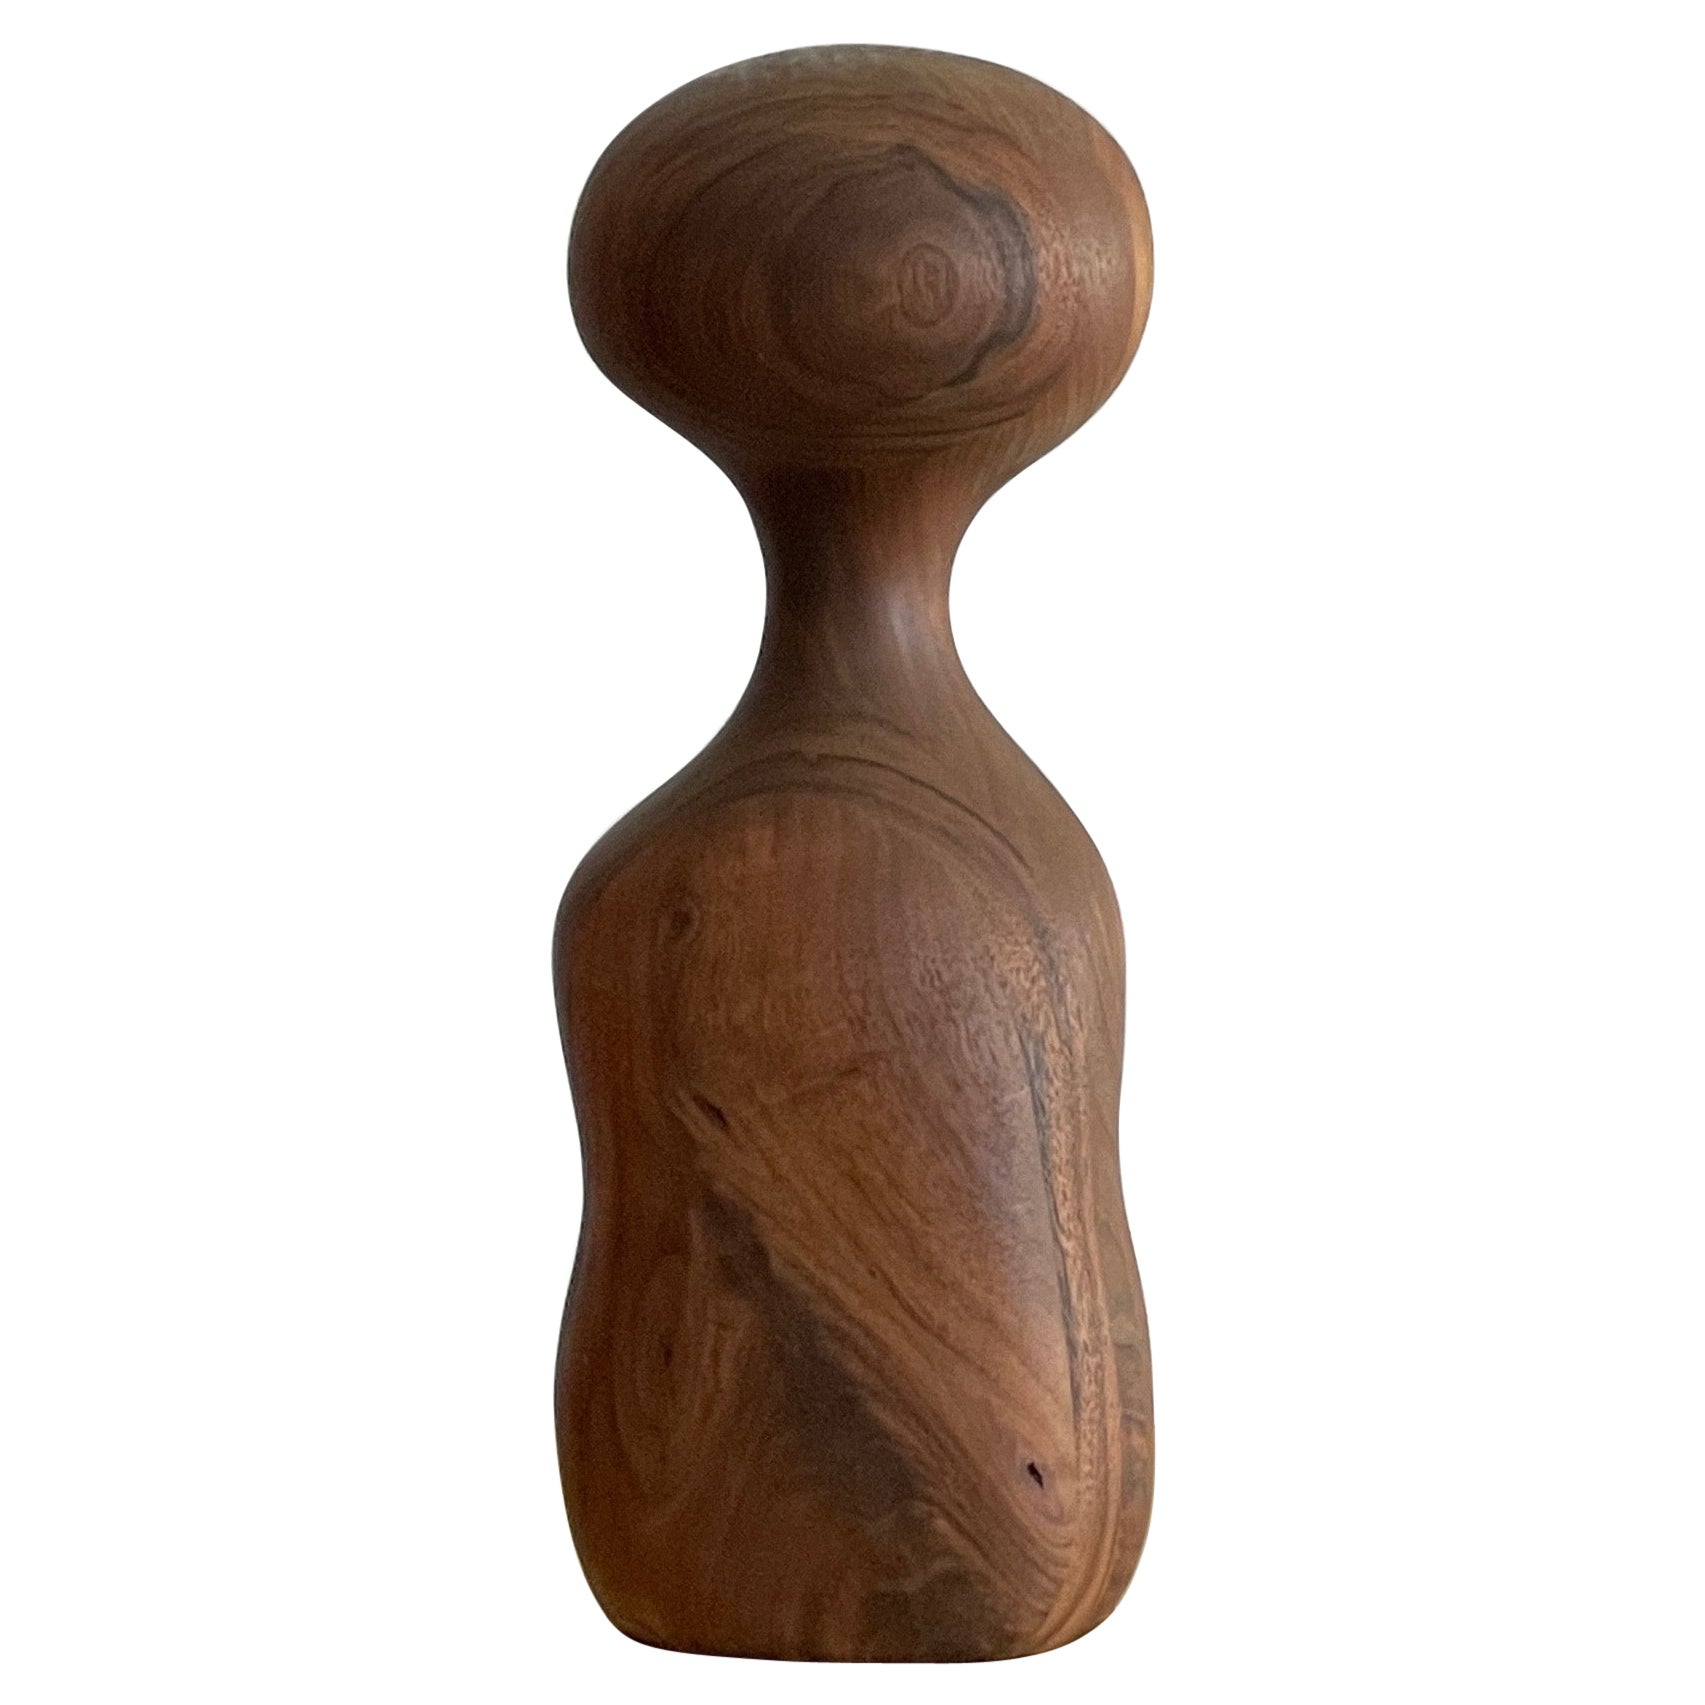 Margery Goldberg Sculpture in Walnut, 1978 For Sale